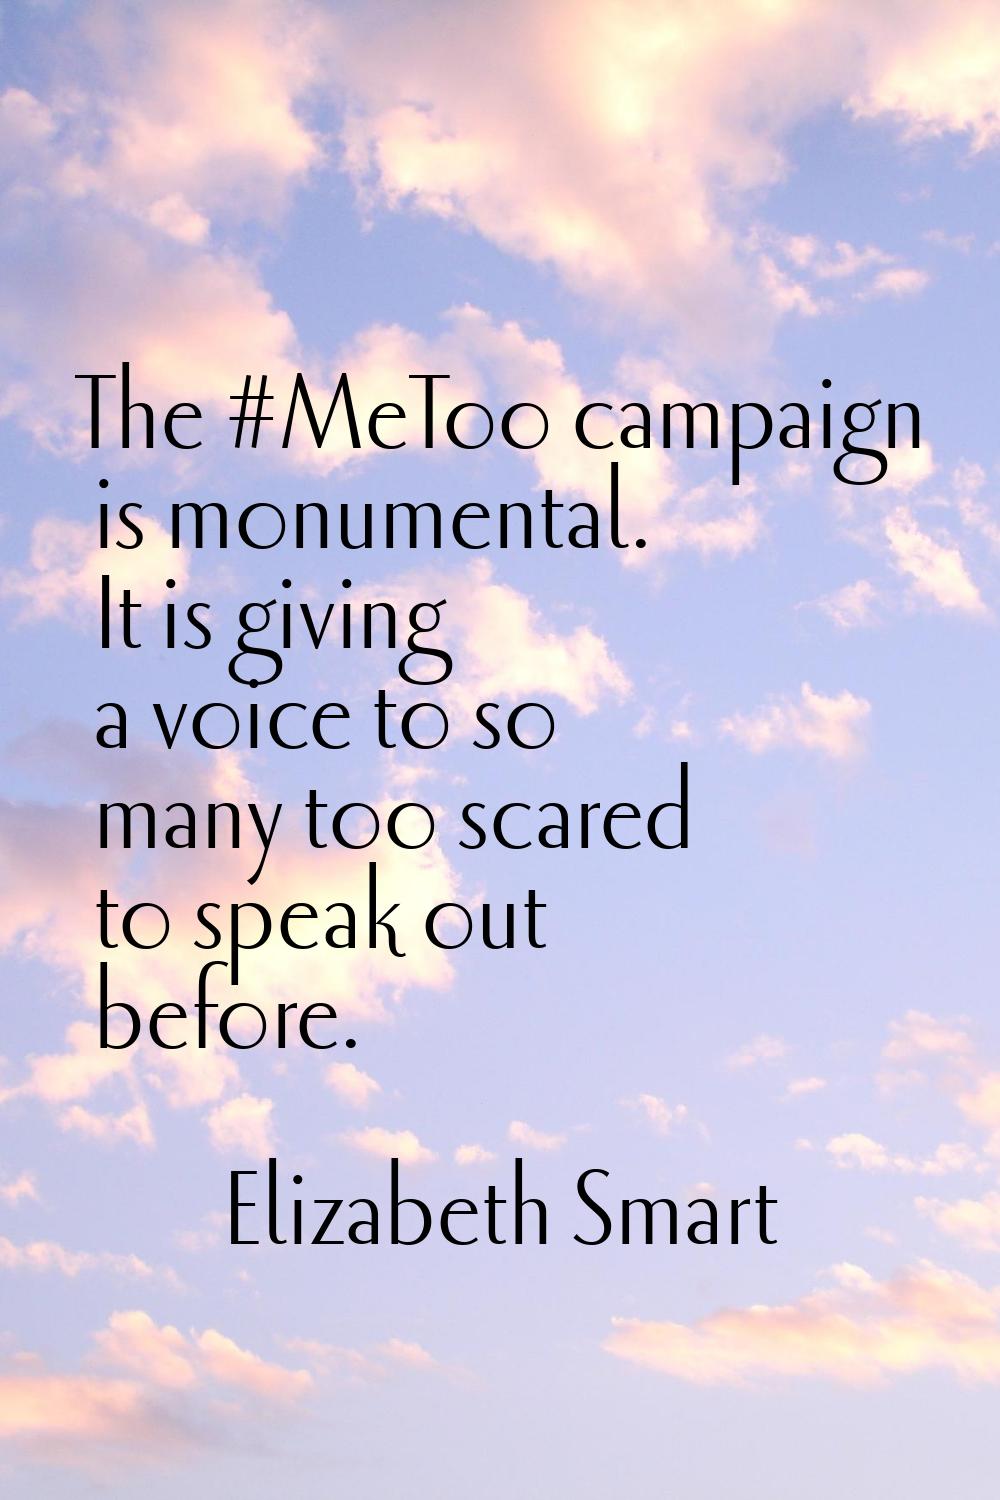 The #MeToo campaign is monumental. It is giving a voice to so many too scared to speak out before.